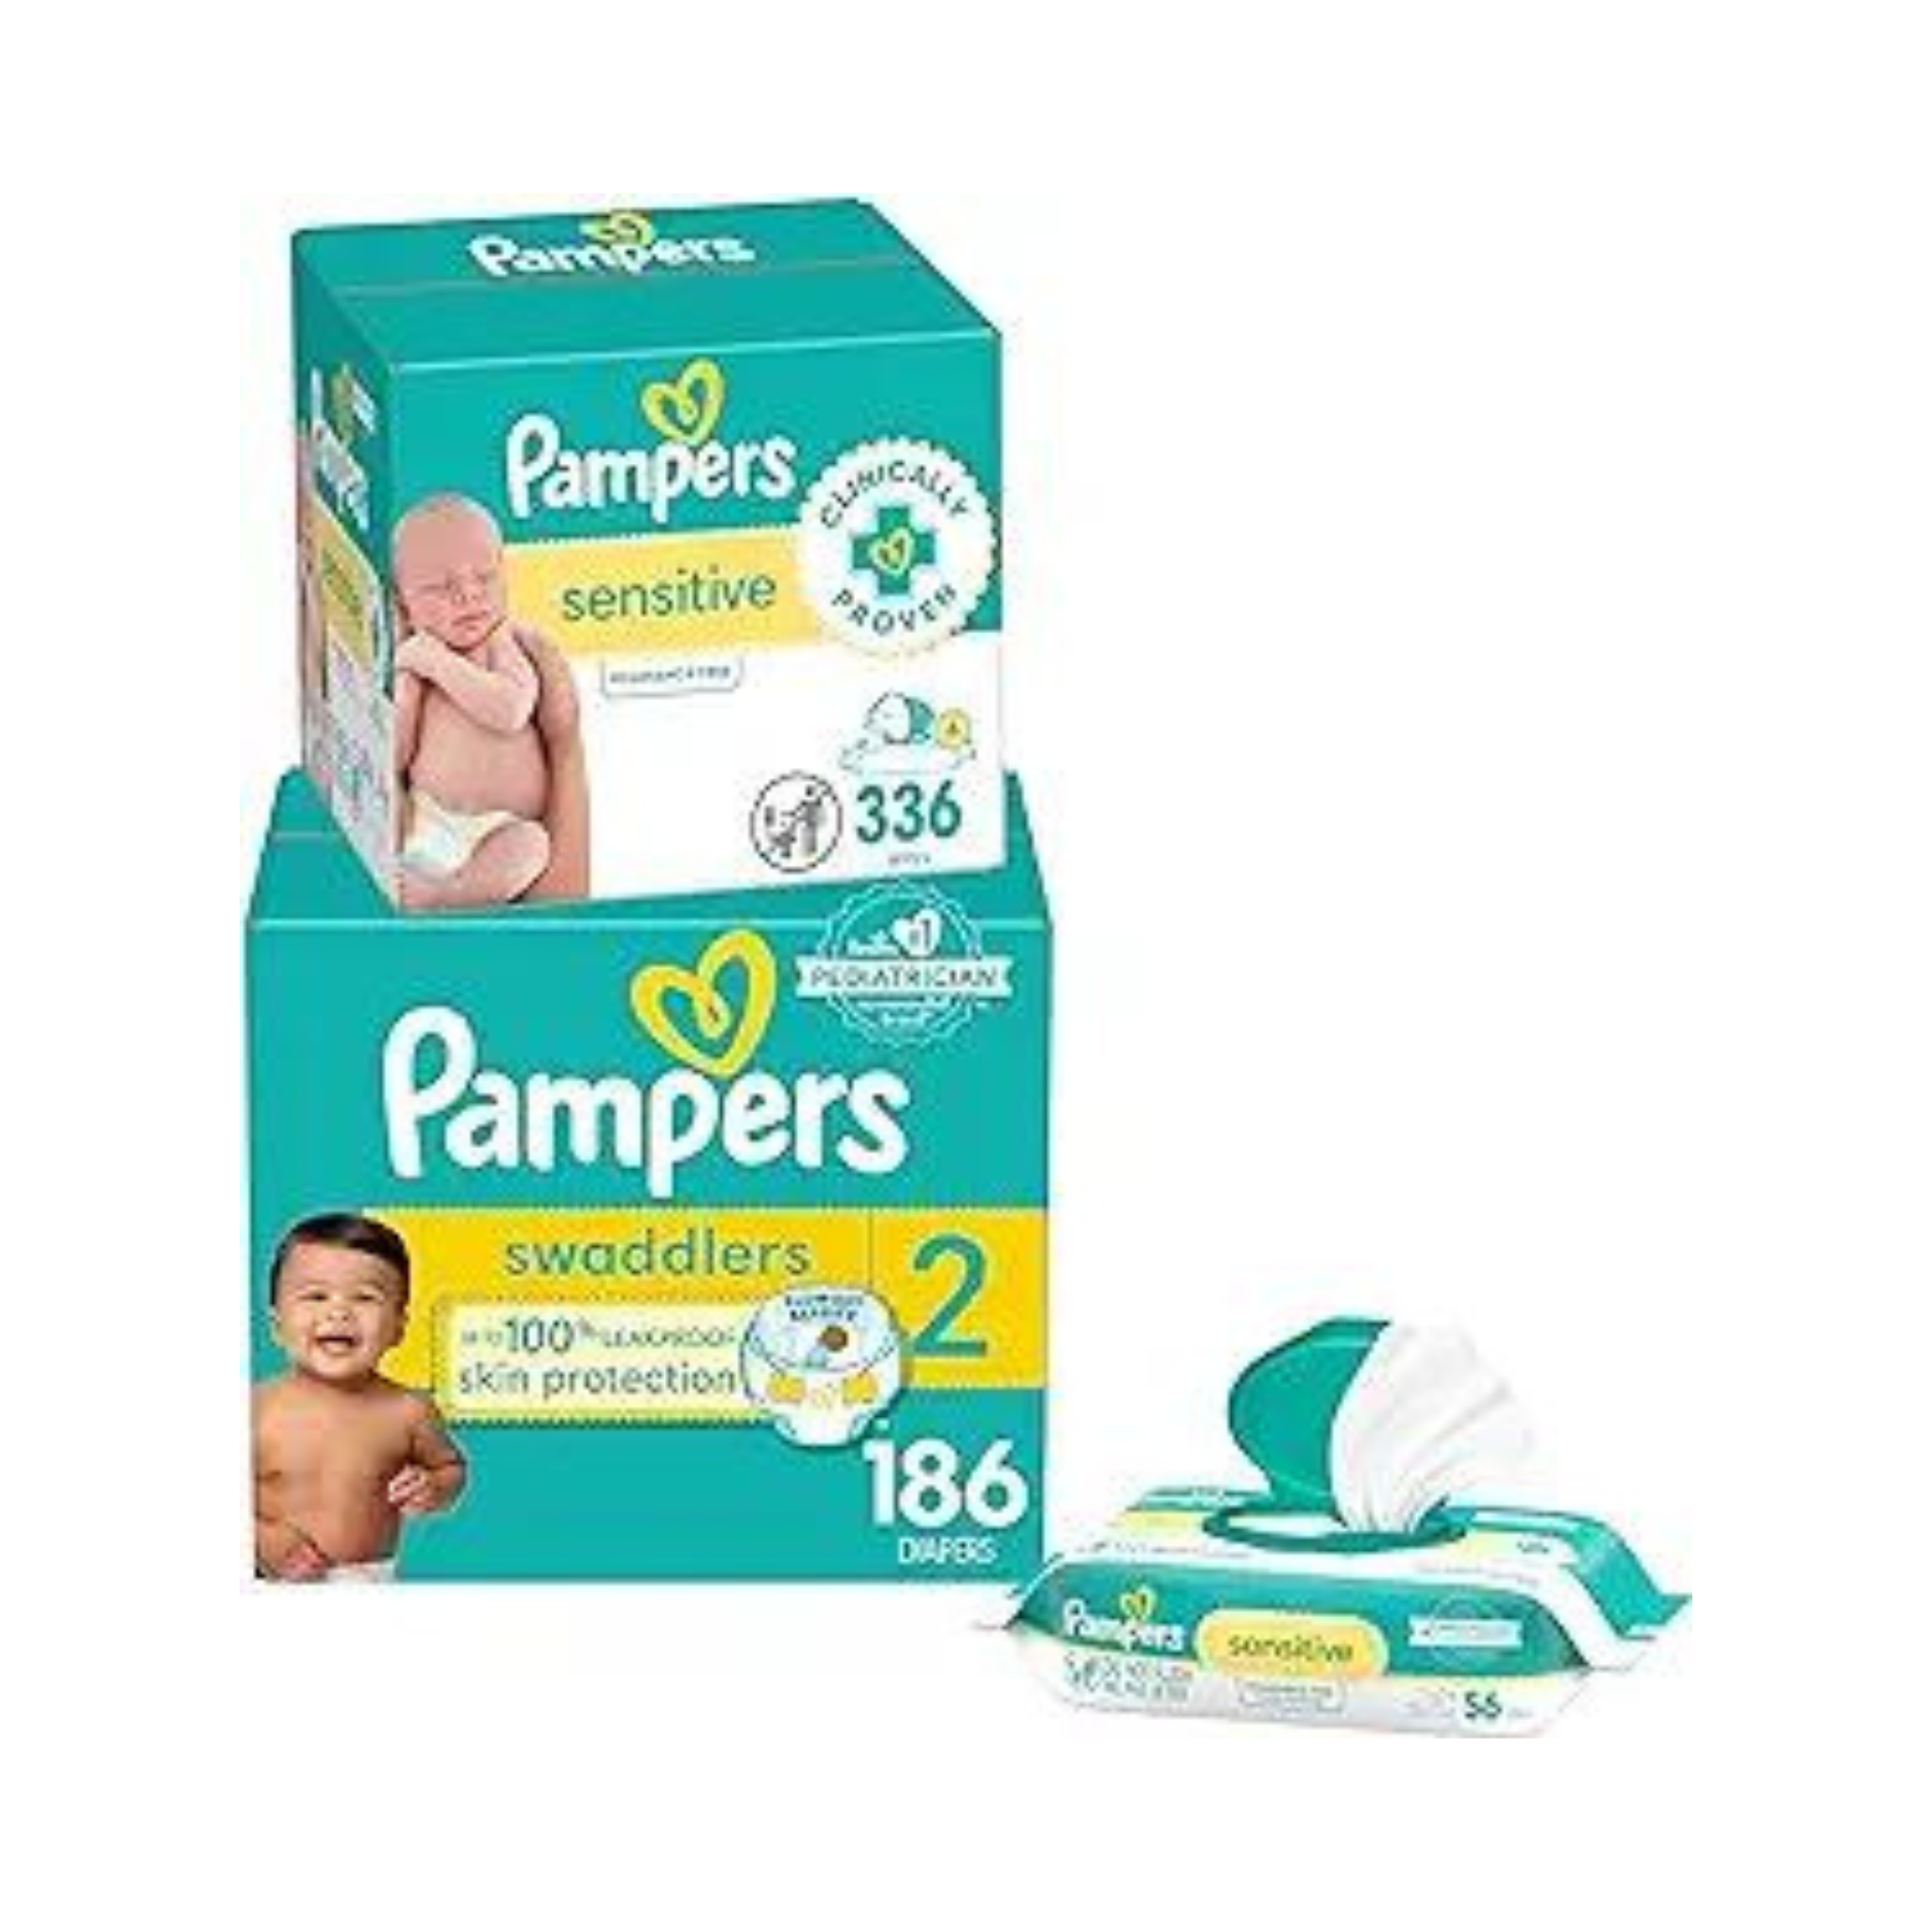 Save On Pampers Diaper and Wipe Bundles